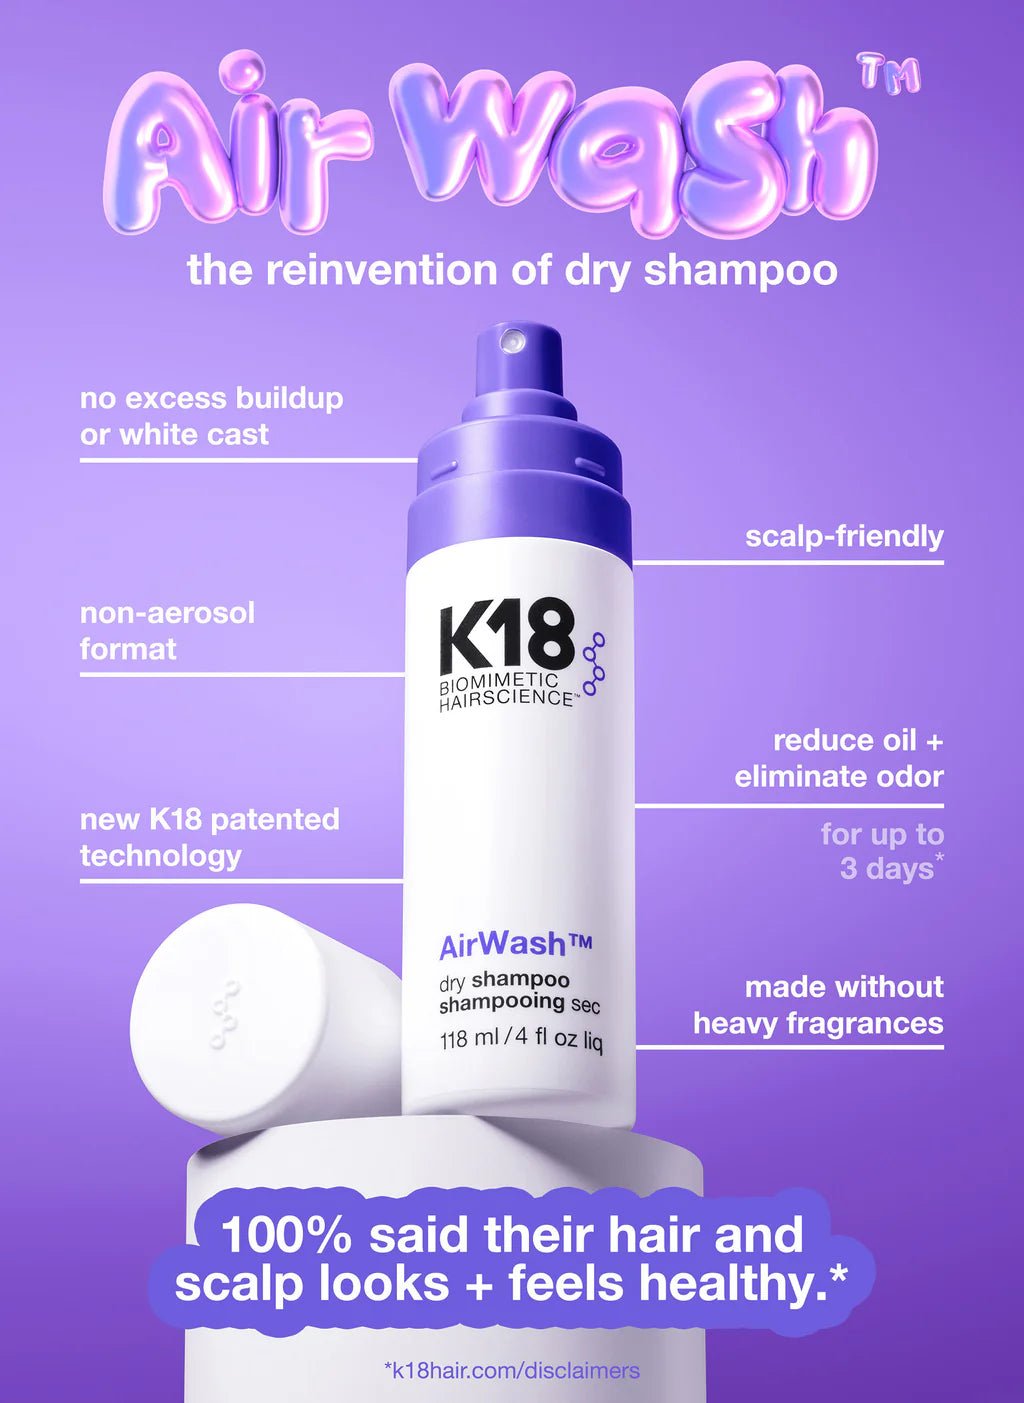 A bottle of Simply Colour Hair Salon Studio & Online Store K18 AirWash Dry Shampoo showcases its features: no residue, non-aerosol, patented odorBIND biotechnology, scalp-friendly, reduces oil, made without heavy fragrances, 100% user satisfaction.